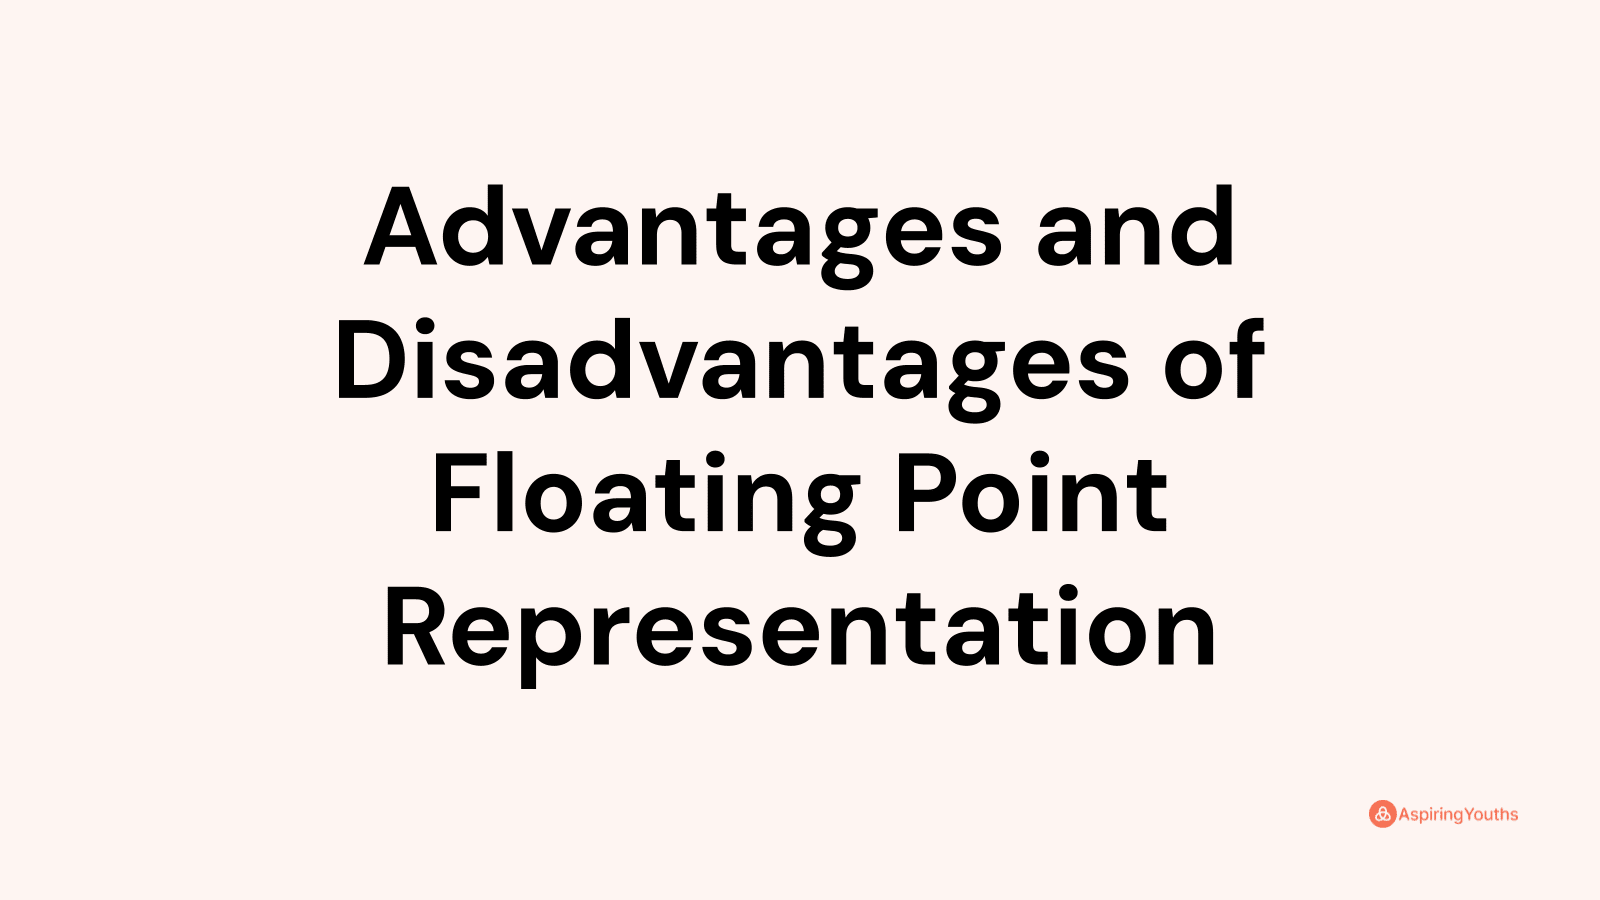 Advantages and disadvantages of Floating Point Representation